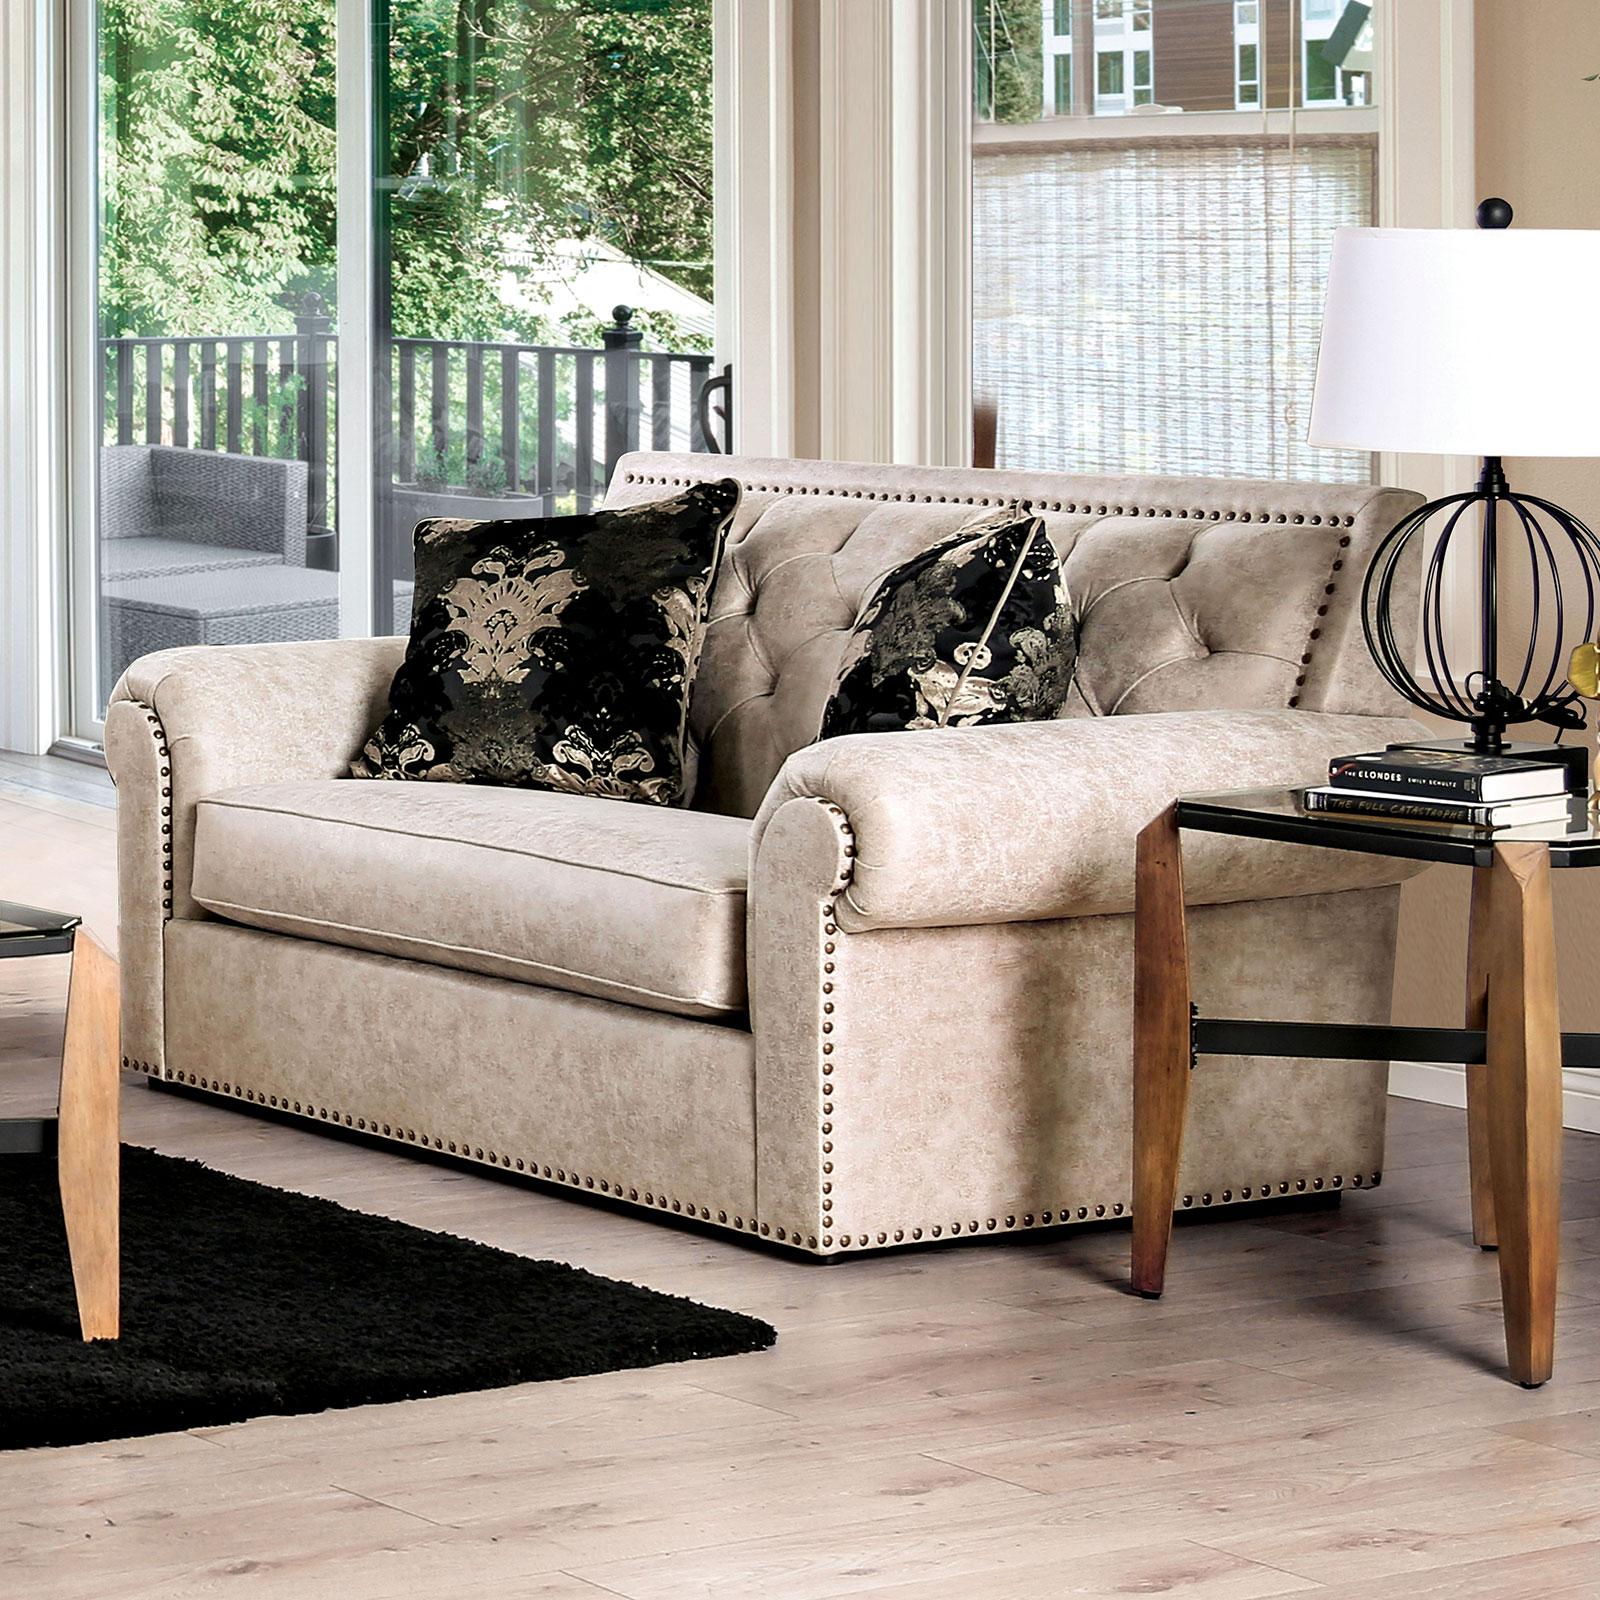 Transitional Loveseat PARSHALL SM2272-LV SM2272-LV in Beige Faux Leather